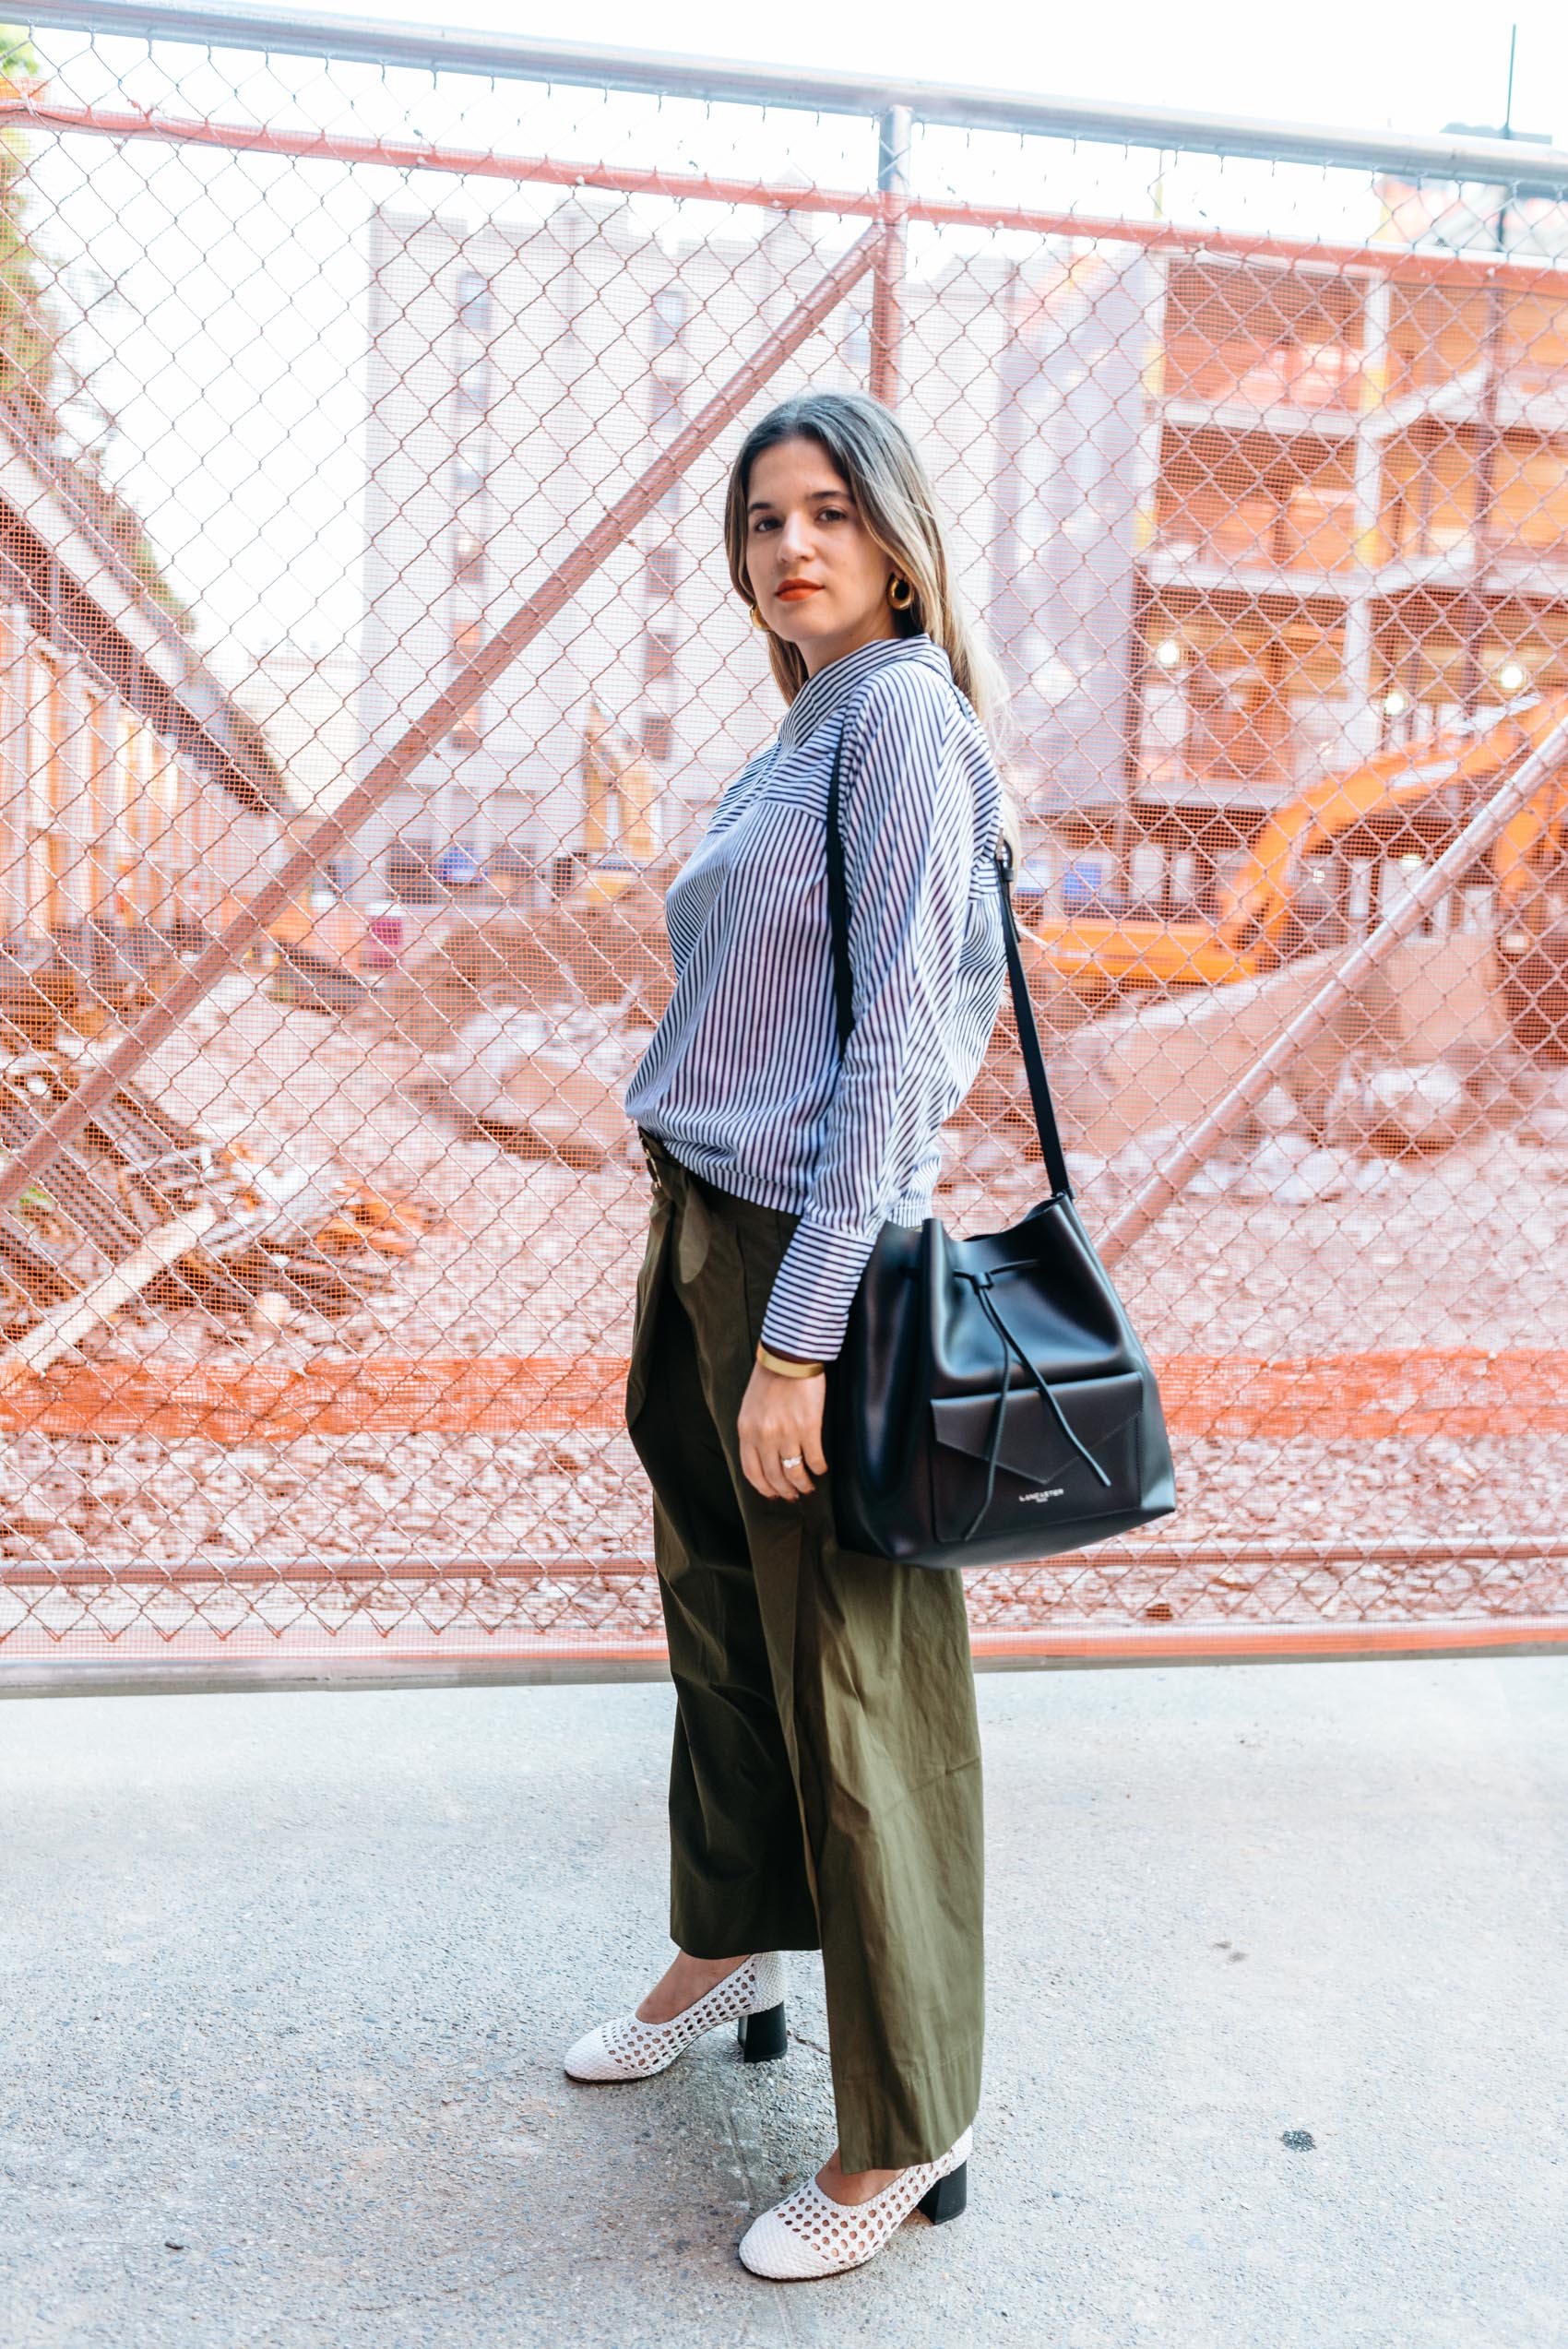 Maristella wears the deconstructed button down shirt trend with Zara olive wide leg pants and white braided leather block heel shoes